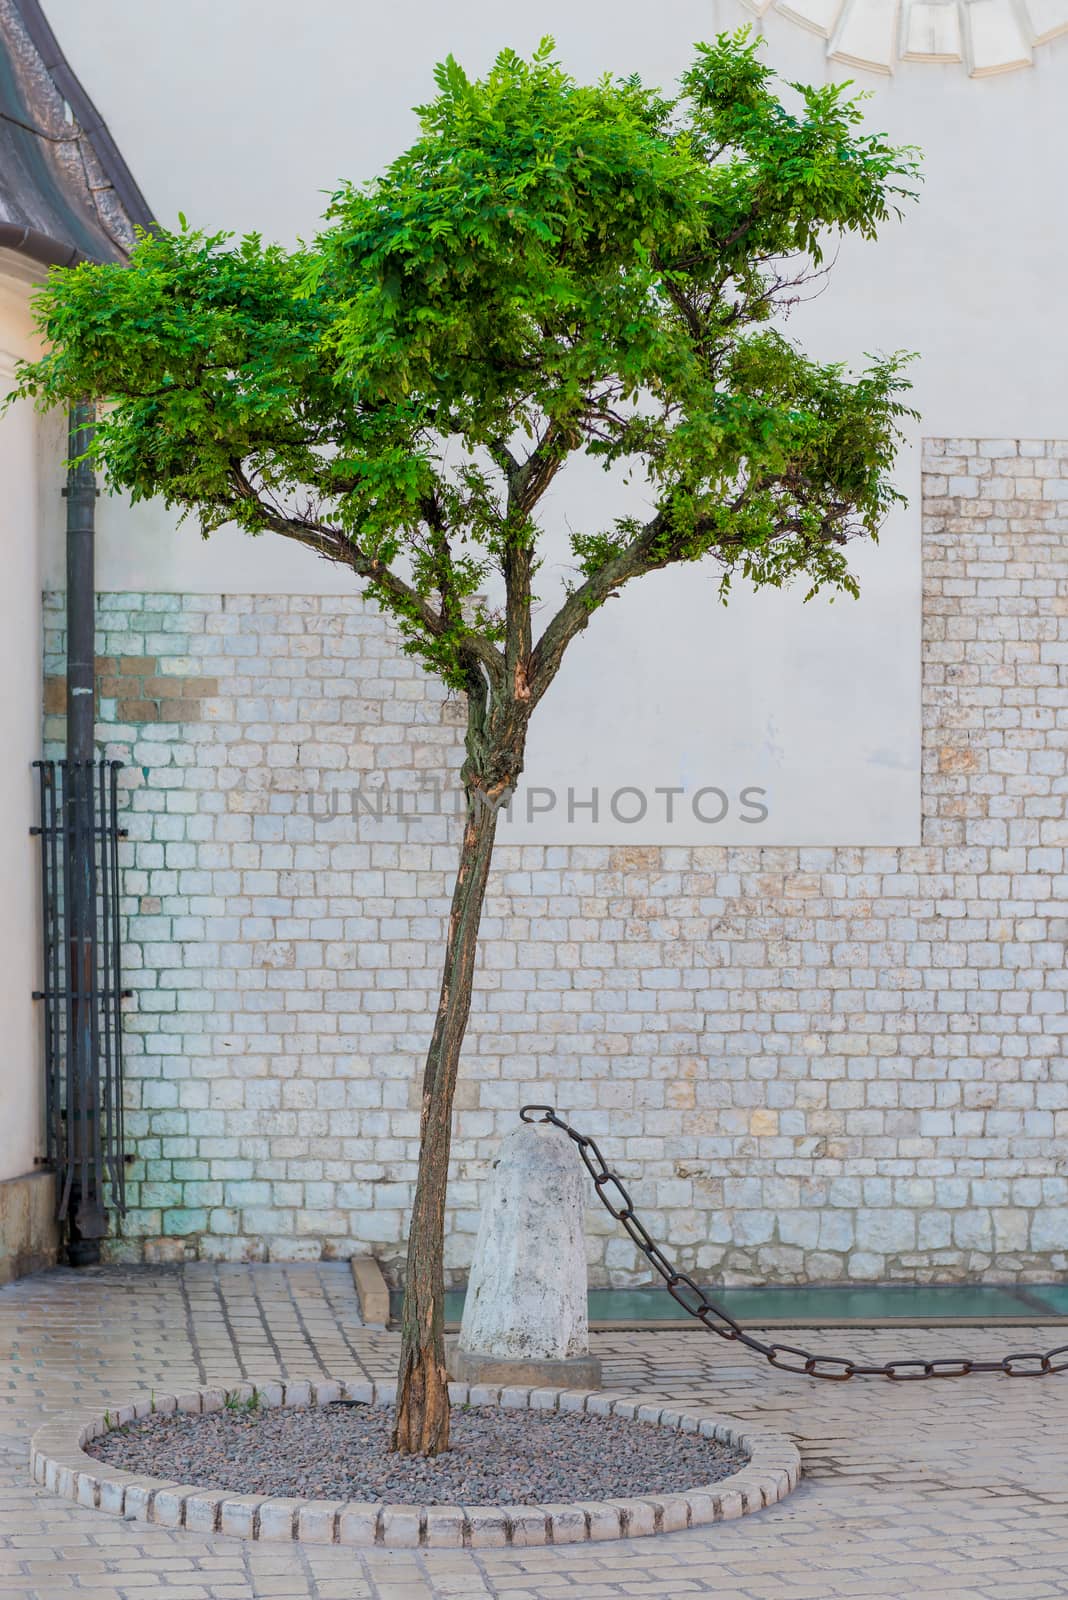 green beautiful tree in the city on a white brick wall background of a building